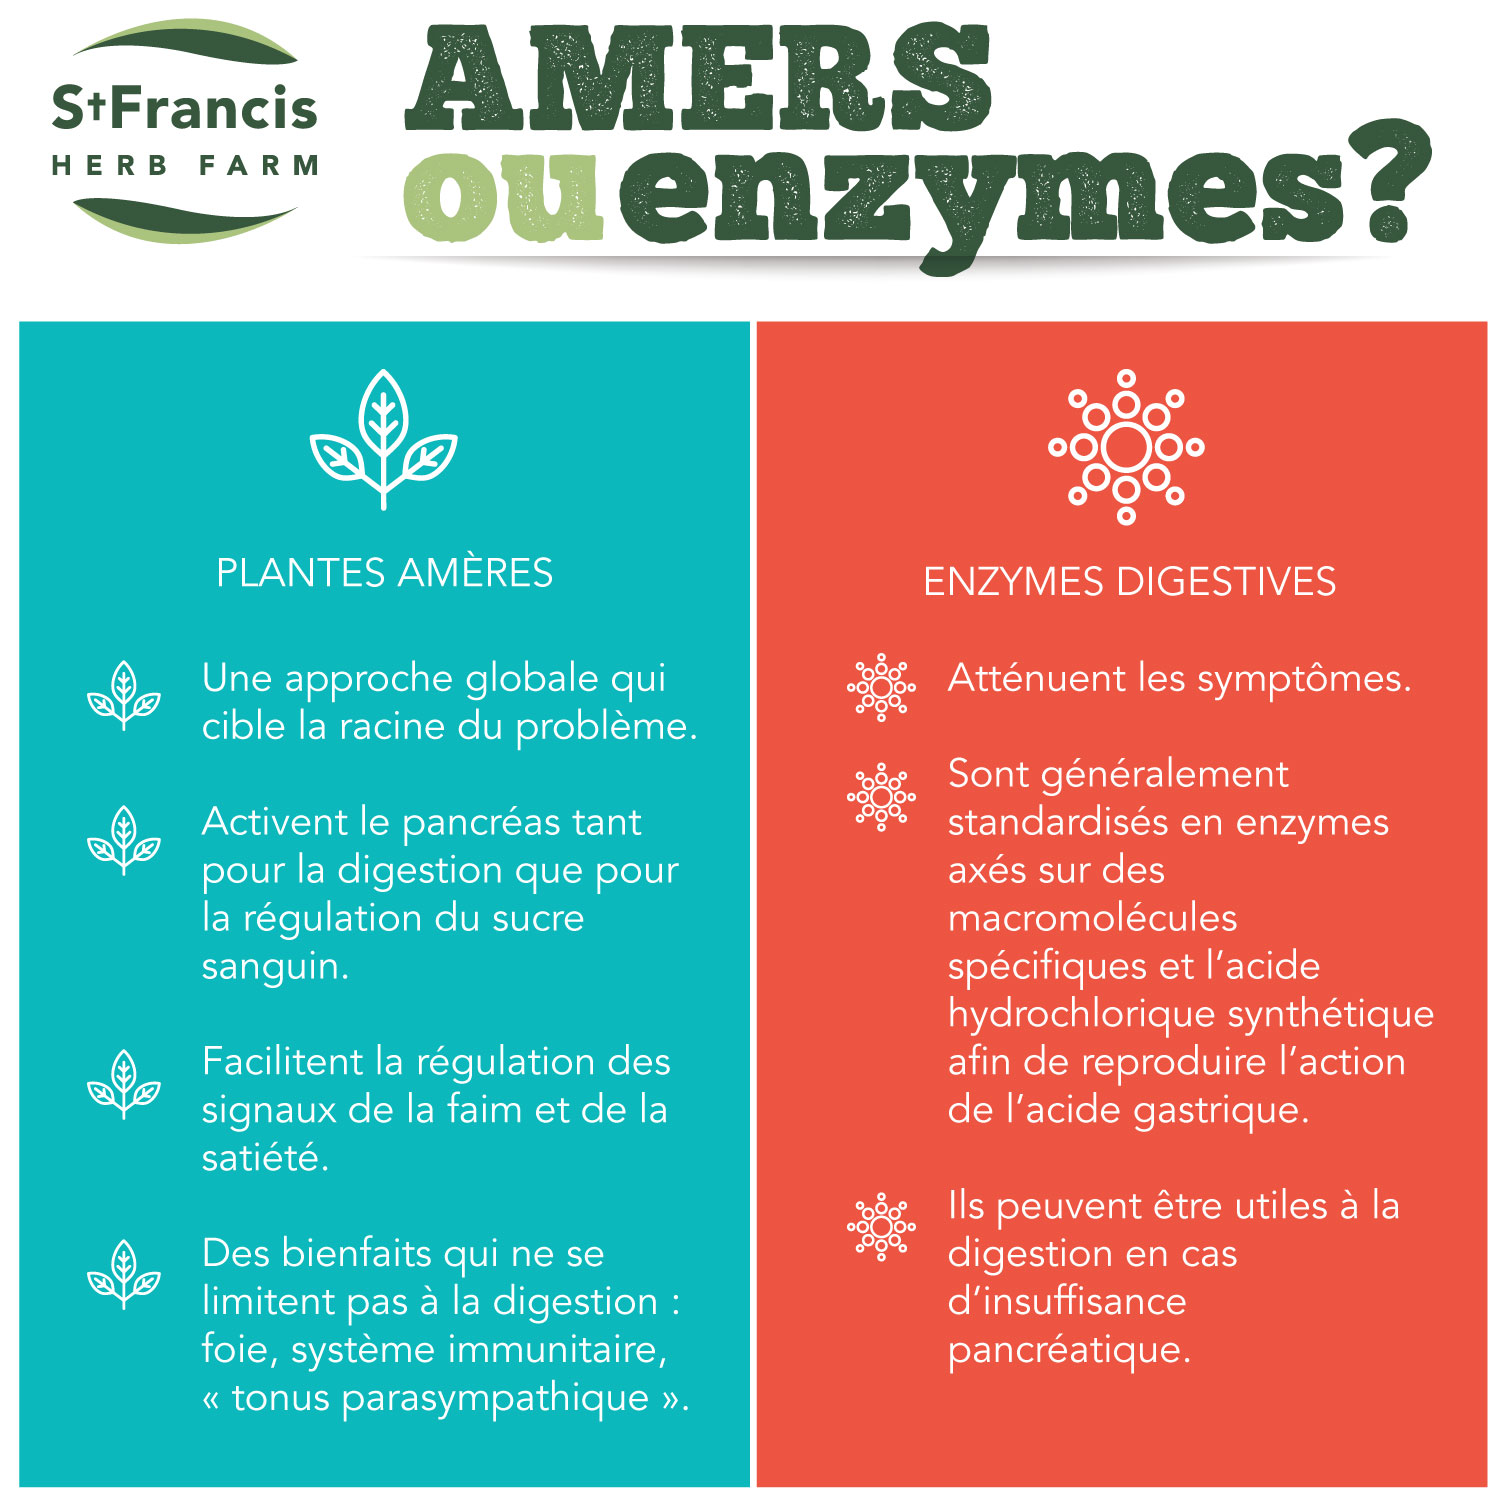 Amers ou enzymes?